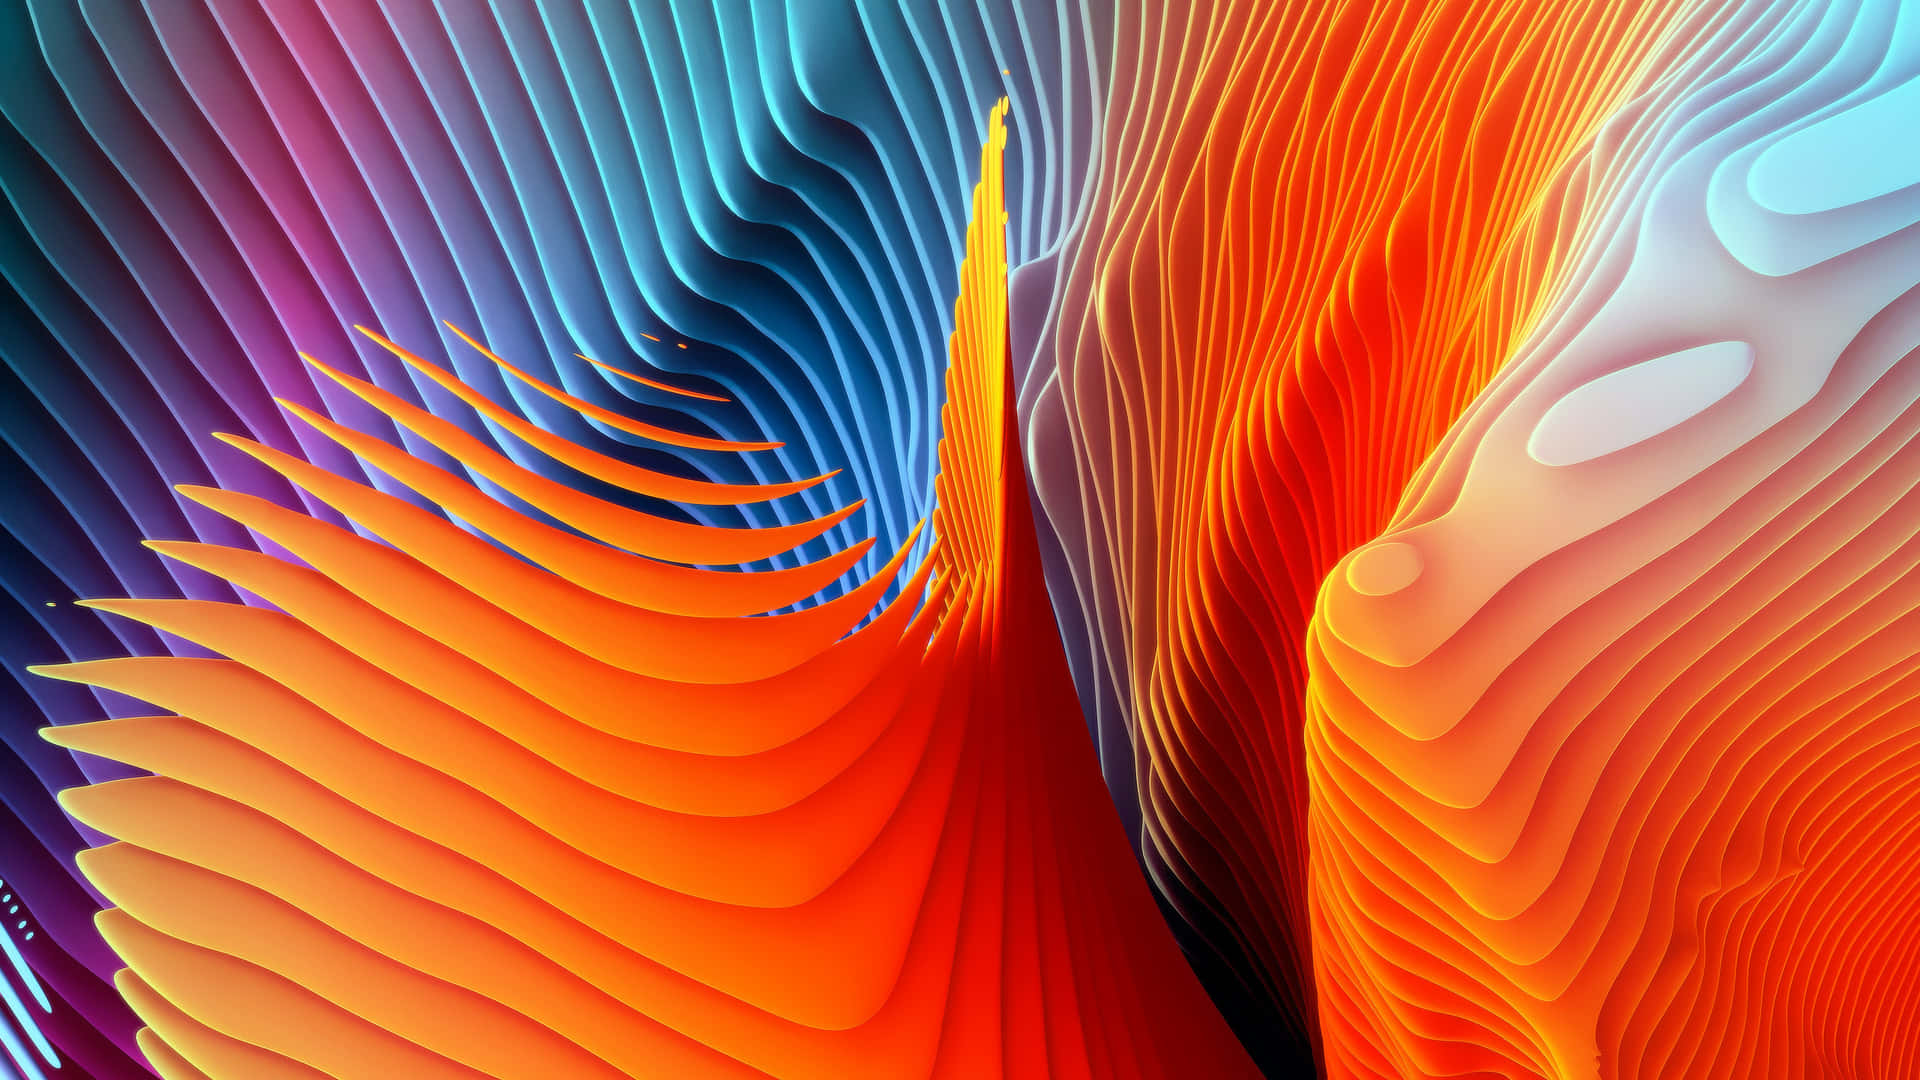 Light up your work with the MacBook Retina Wallpaper